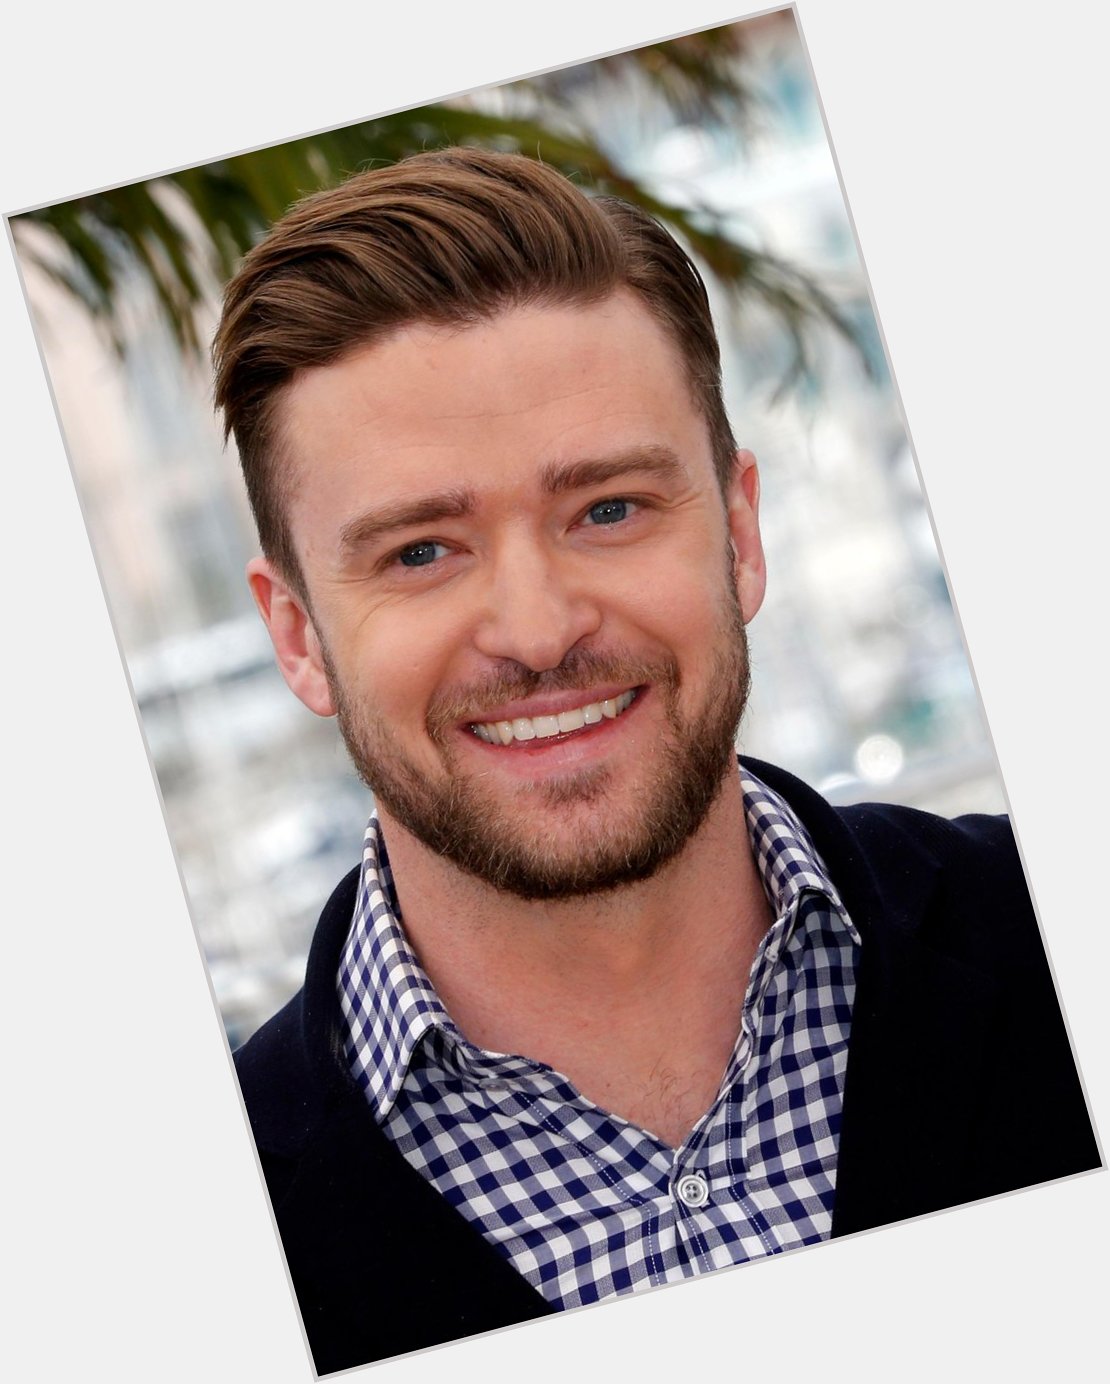 HAPPY BIRTHDAY JUSTIN TIMBERLAKE! CRY ME A RIVER .   